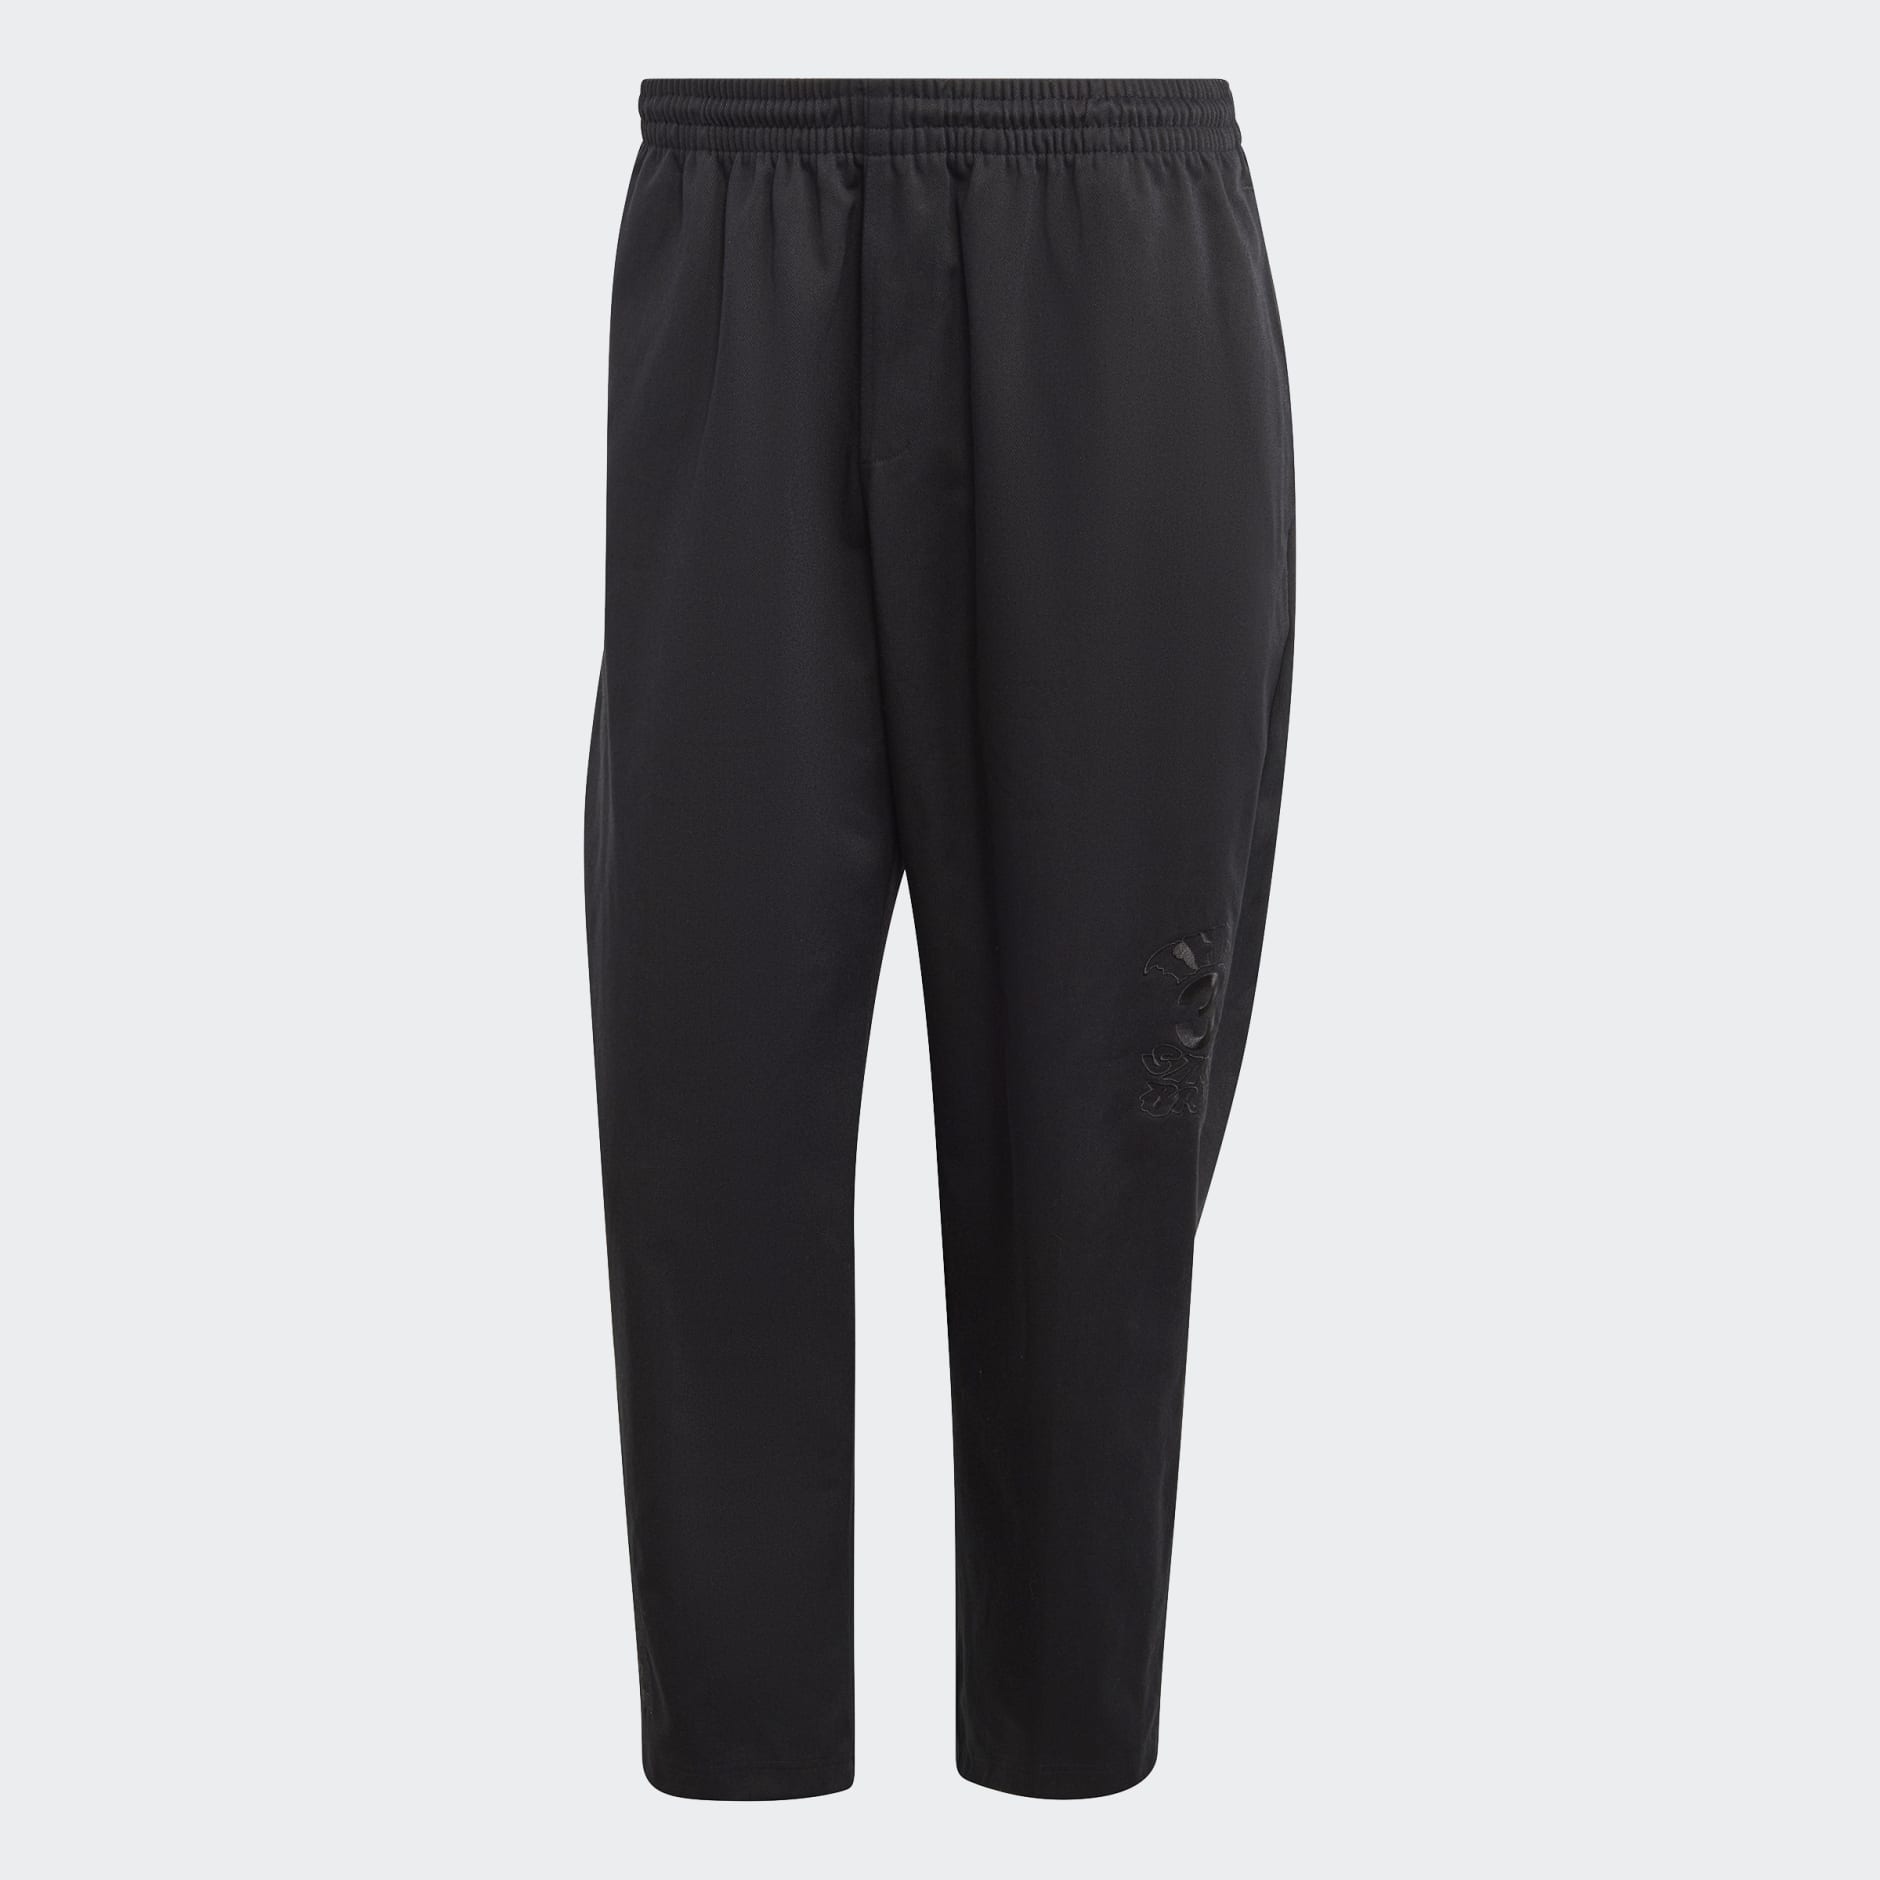 Clothing - Graphics Campus Chino Pants - Black | adidas South Africa